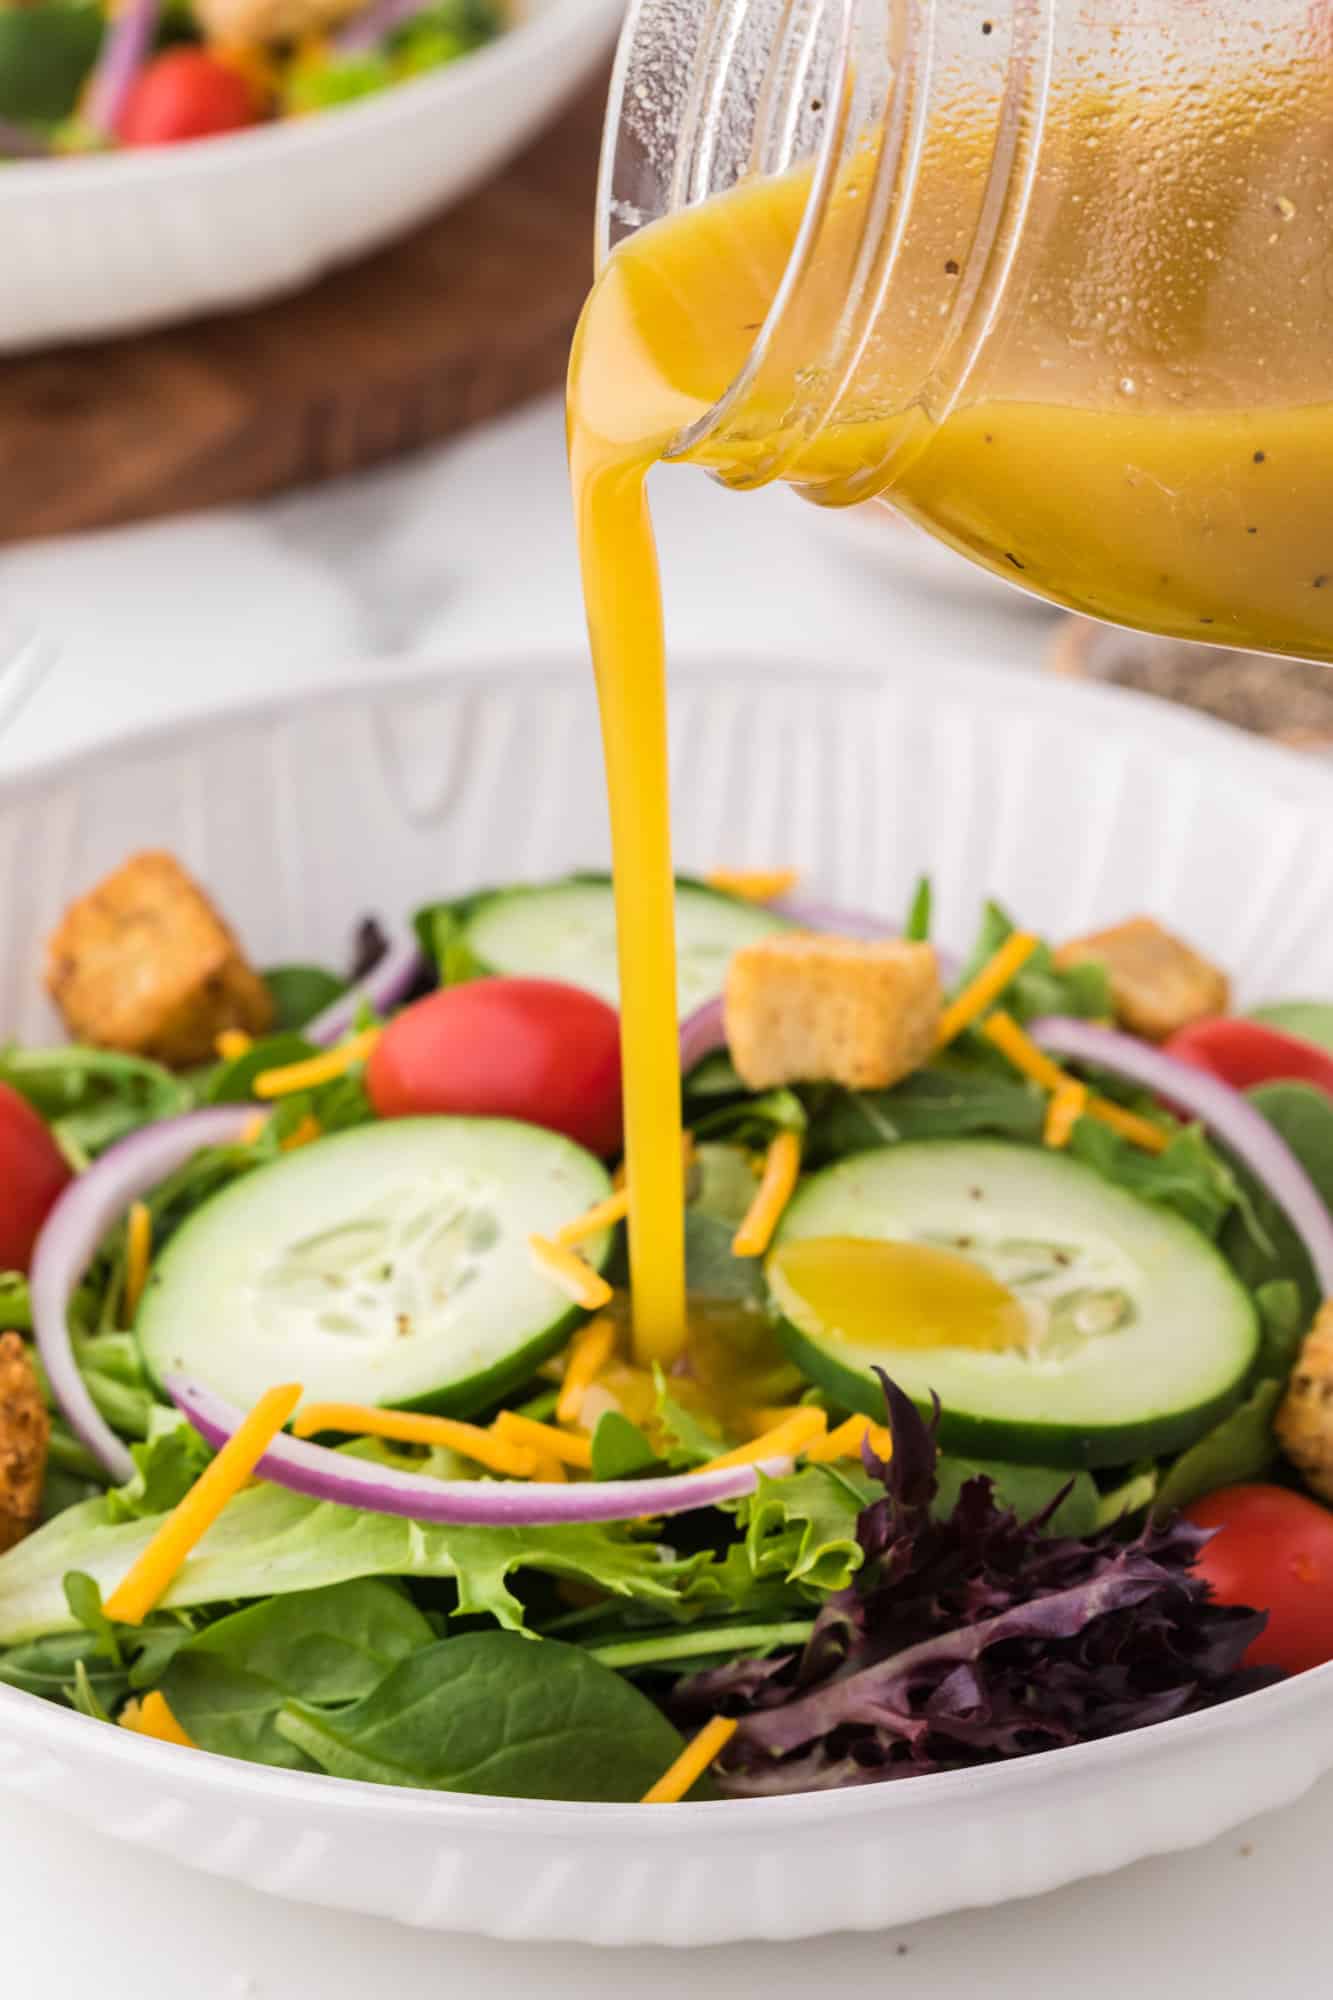 Vinaigrette being poured on a green salad.